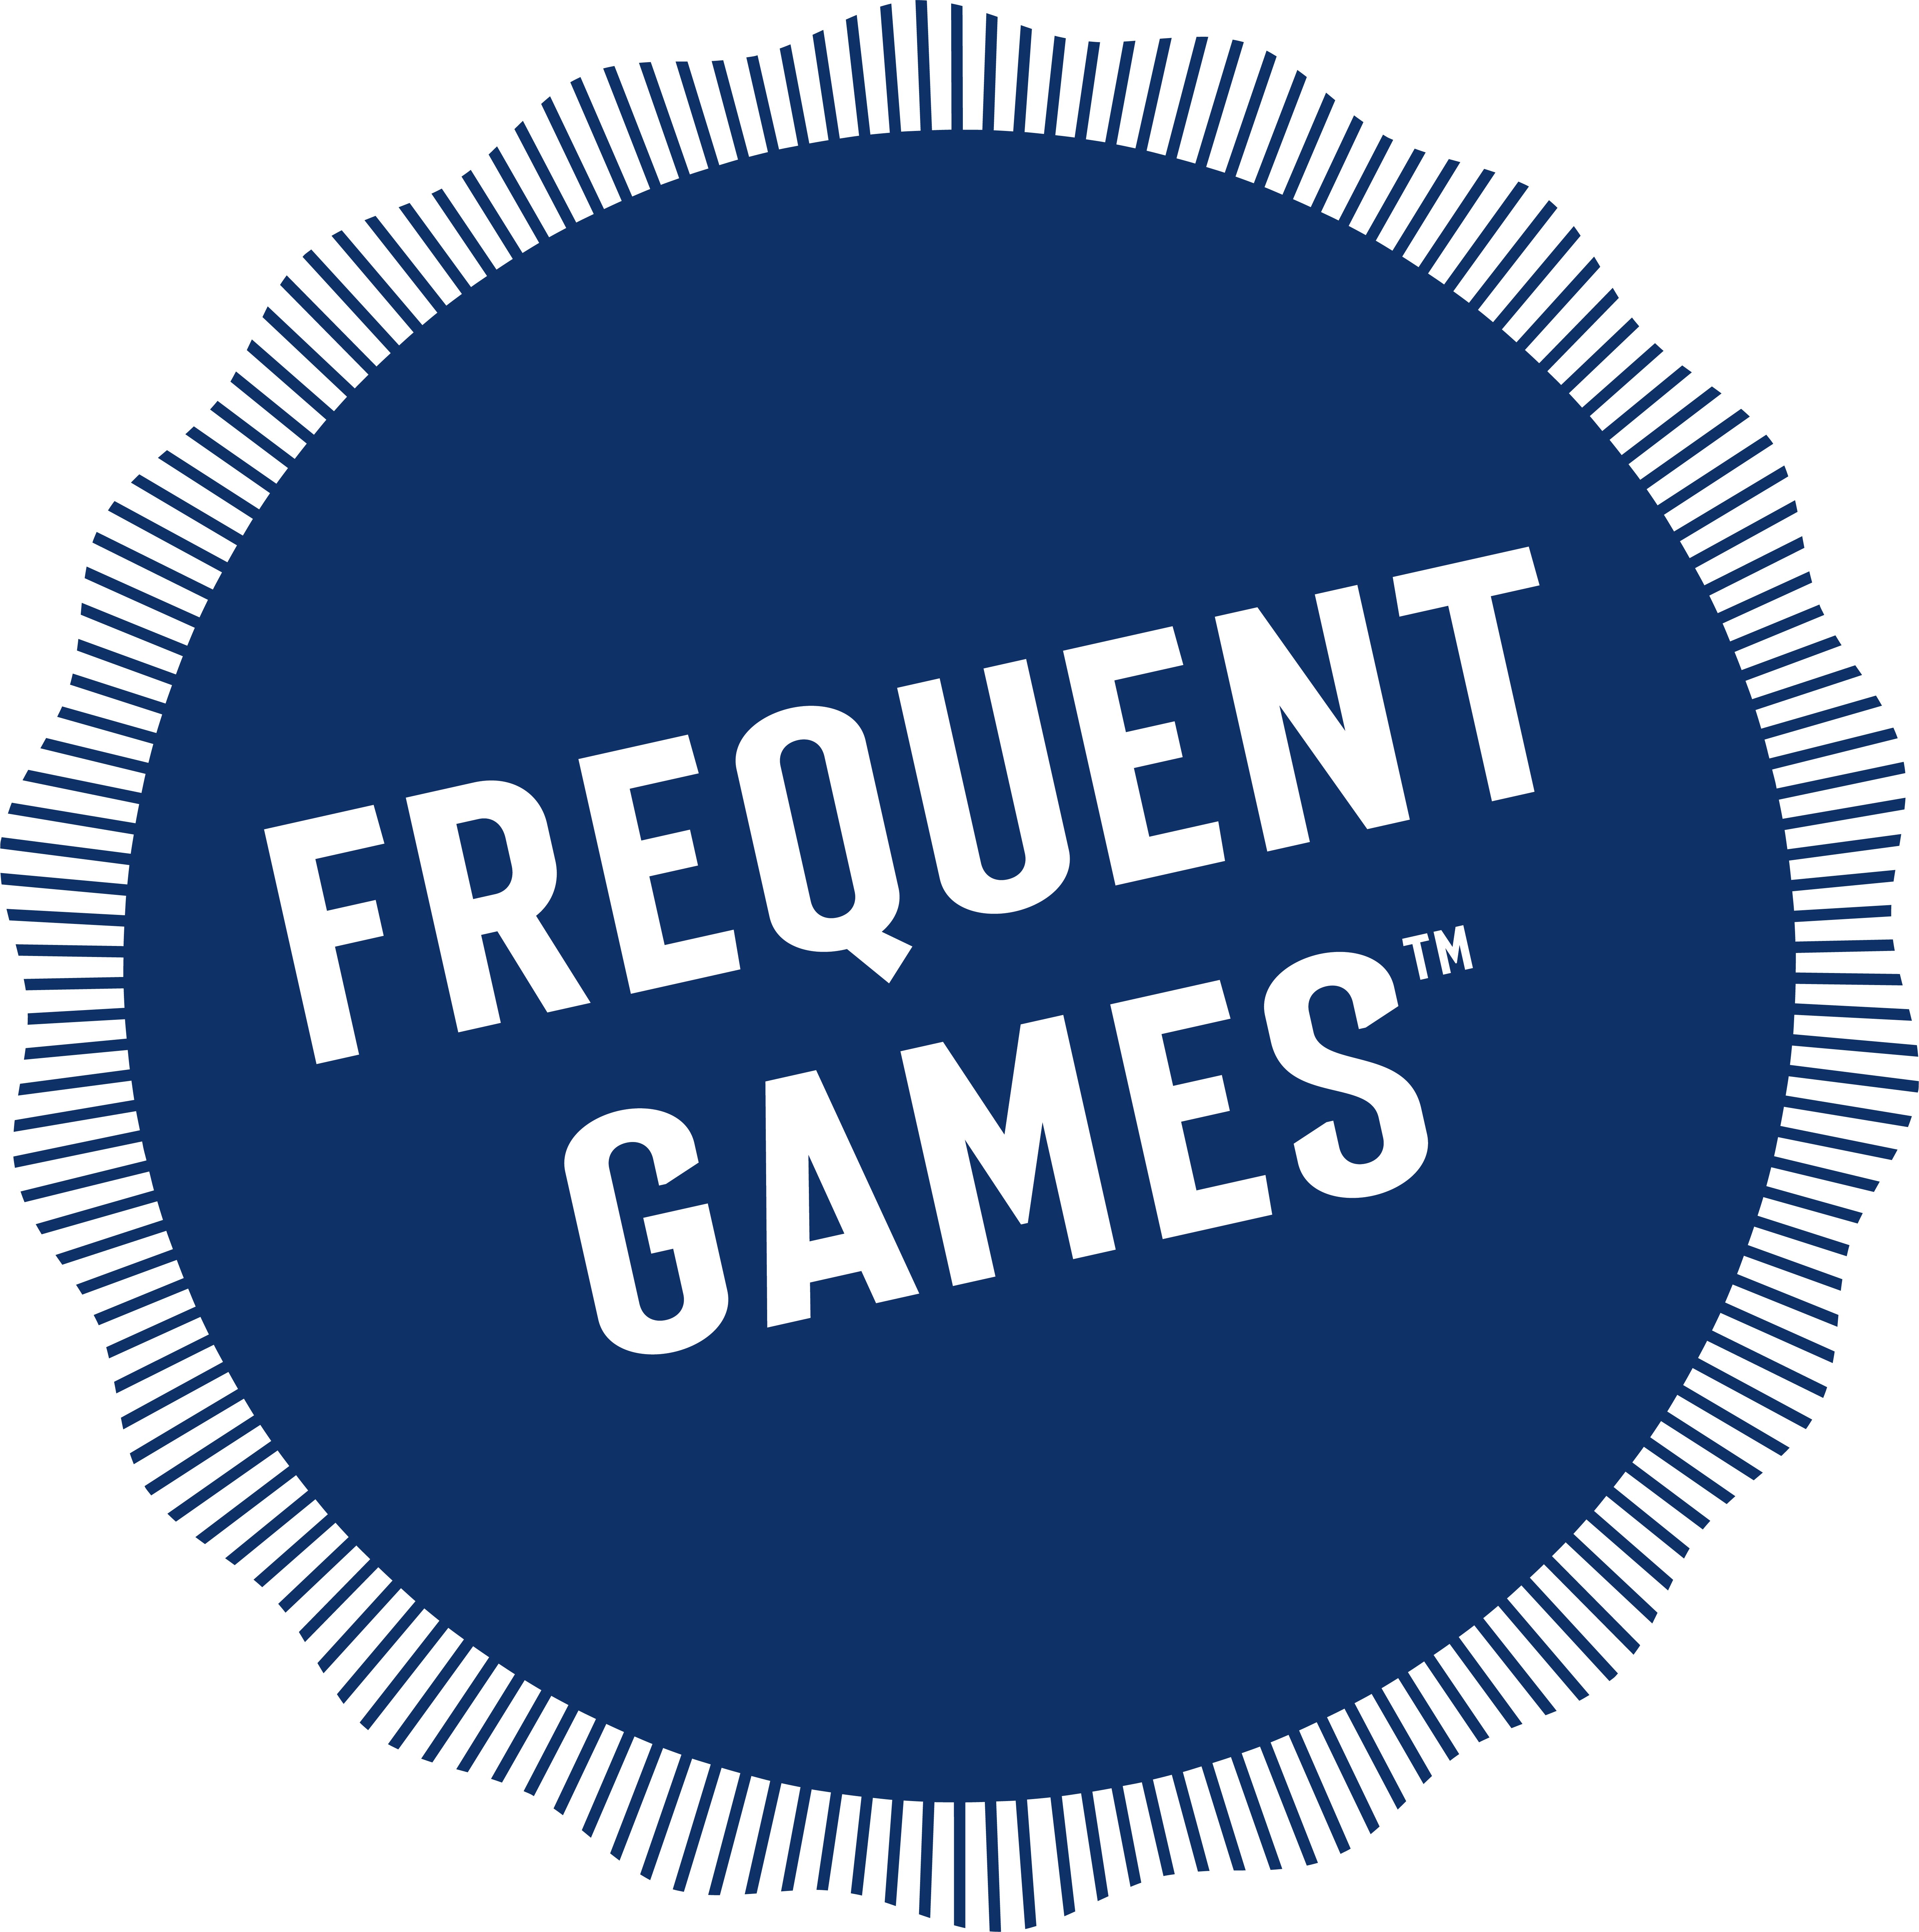 Frequent Games